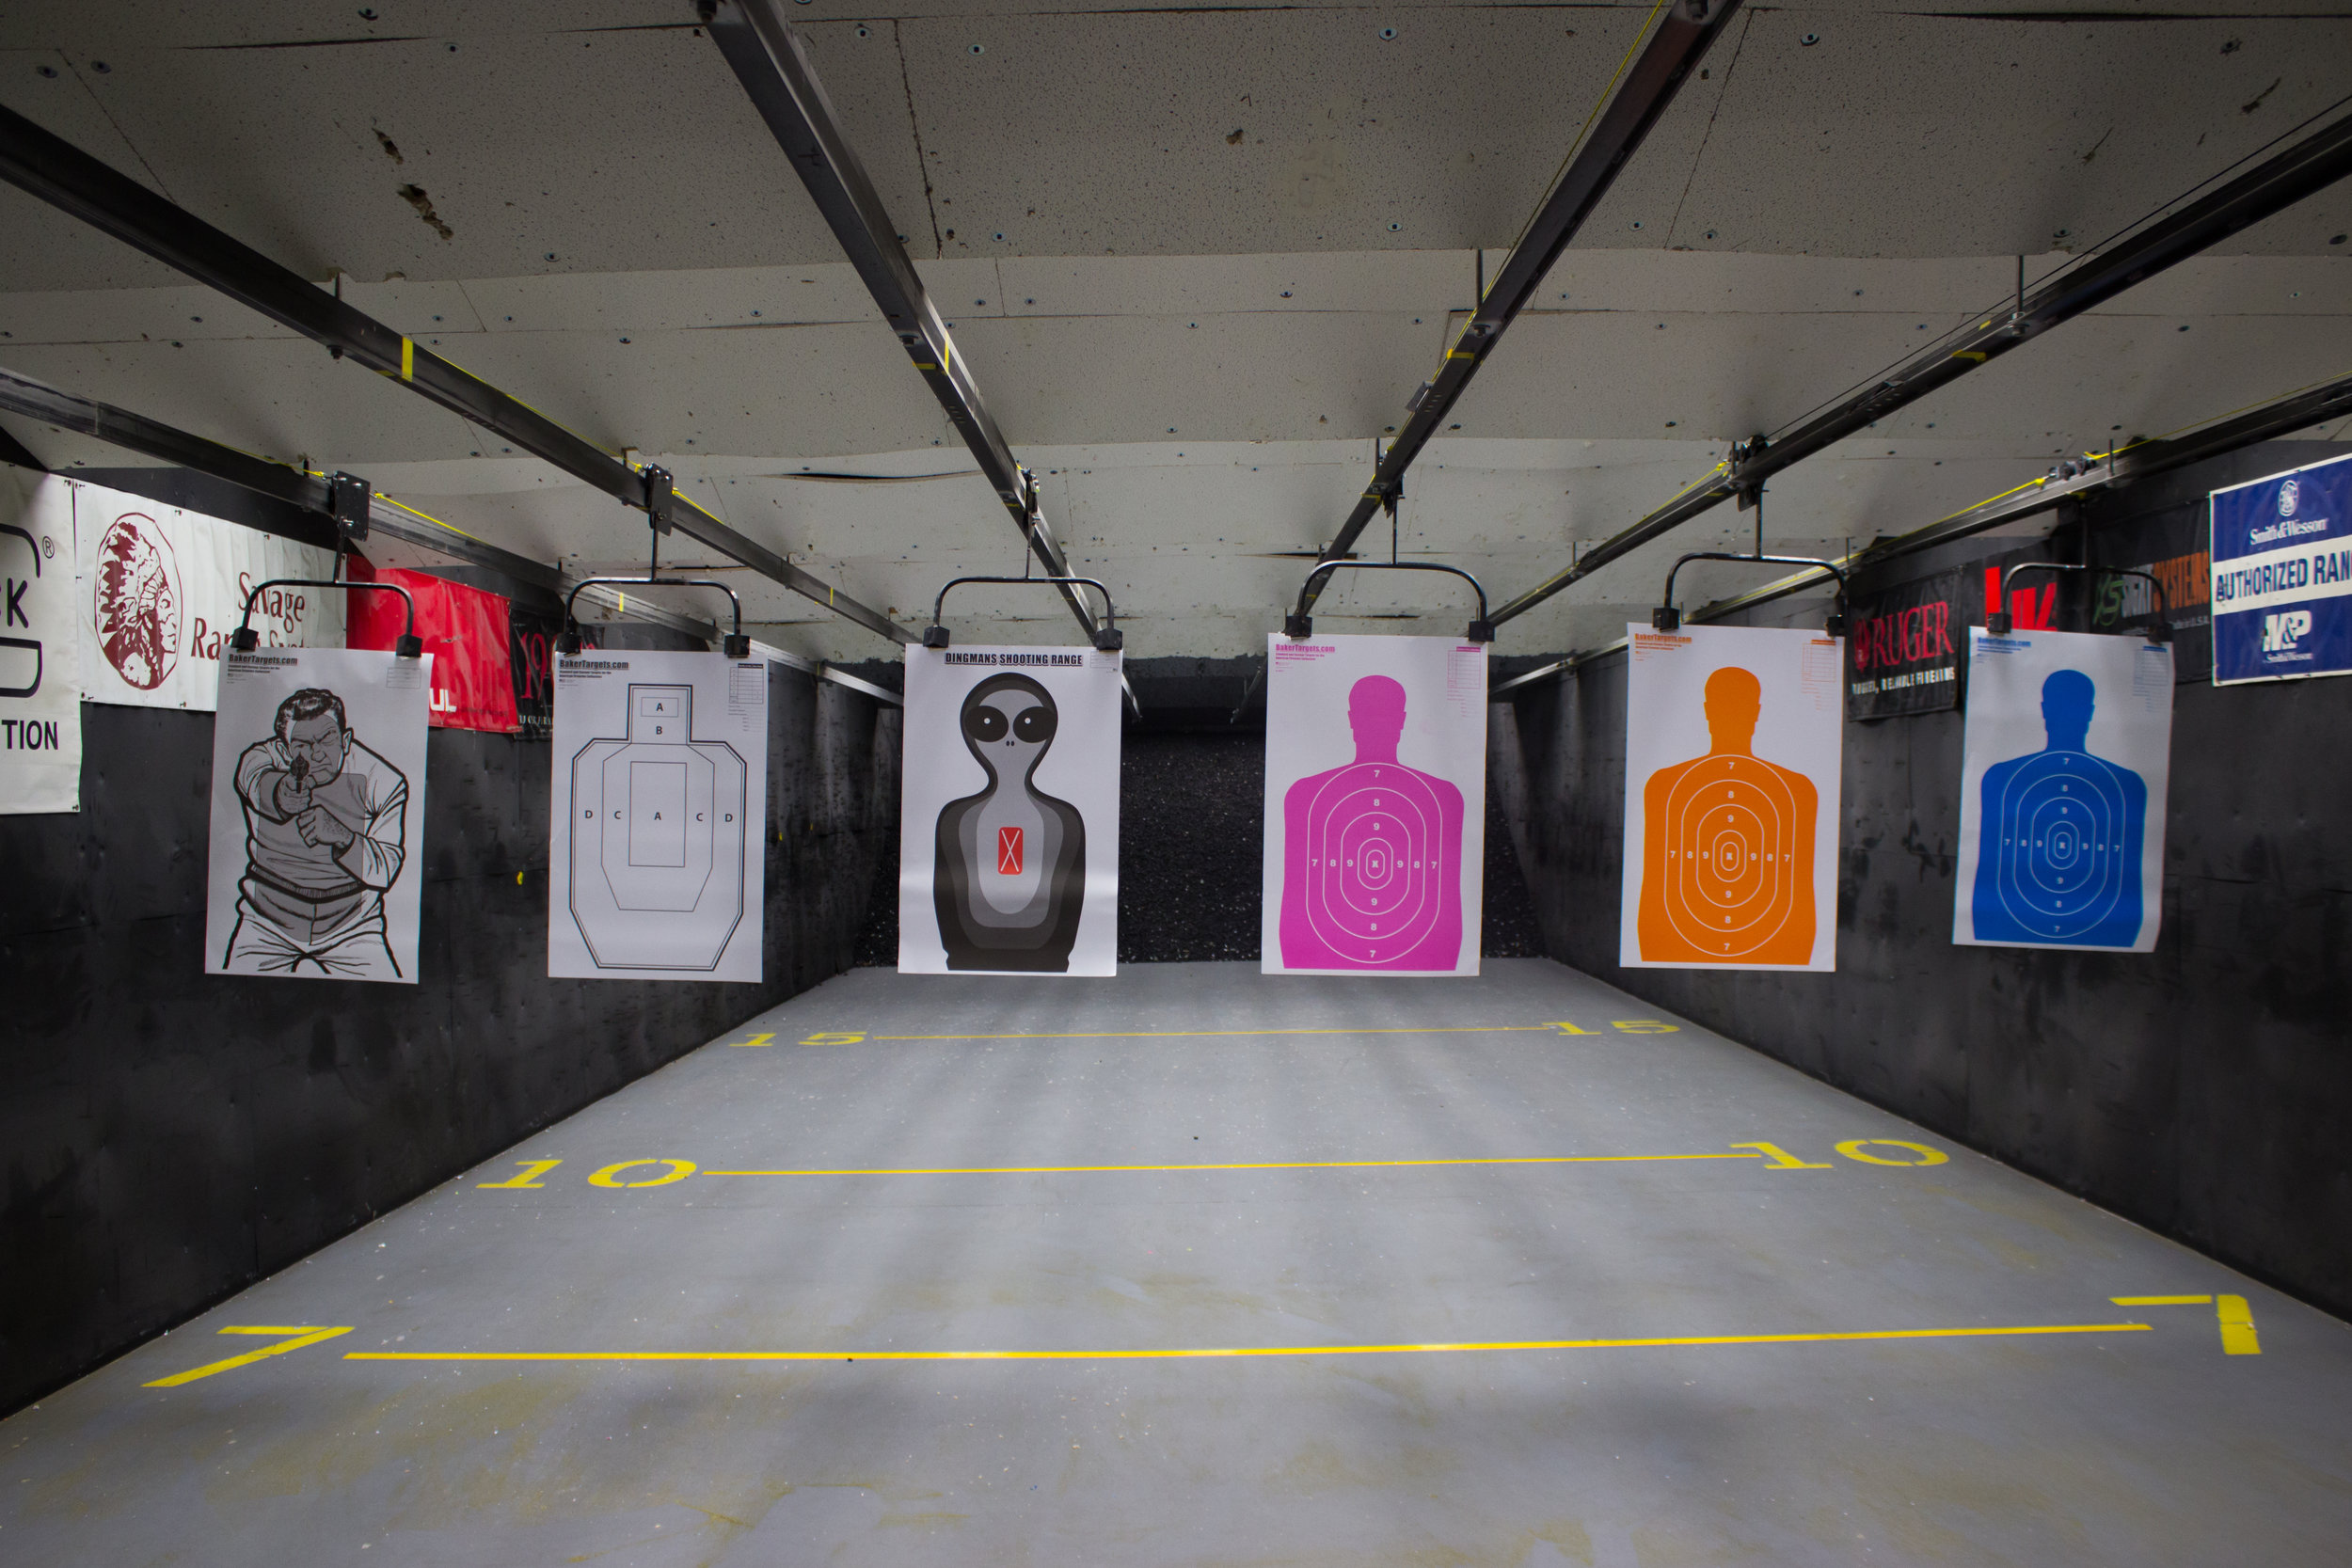   WELCOME TO THE DINGMANS SHOOTING RANGE   PIKE COUNTY’S PREMIER INDOOR SHOOTING FACILITY AN INTERNATIONAL DESTINATION    Last Shooter One Hour Before Closing 